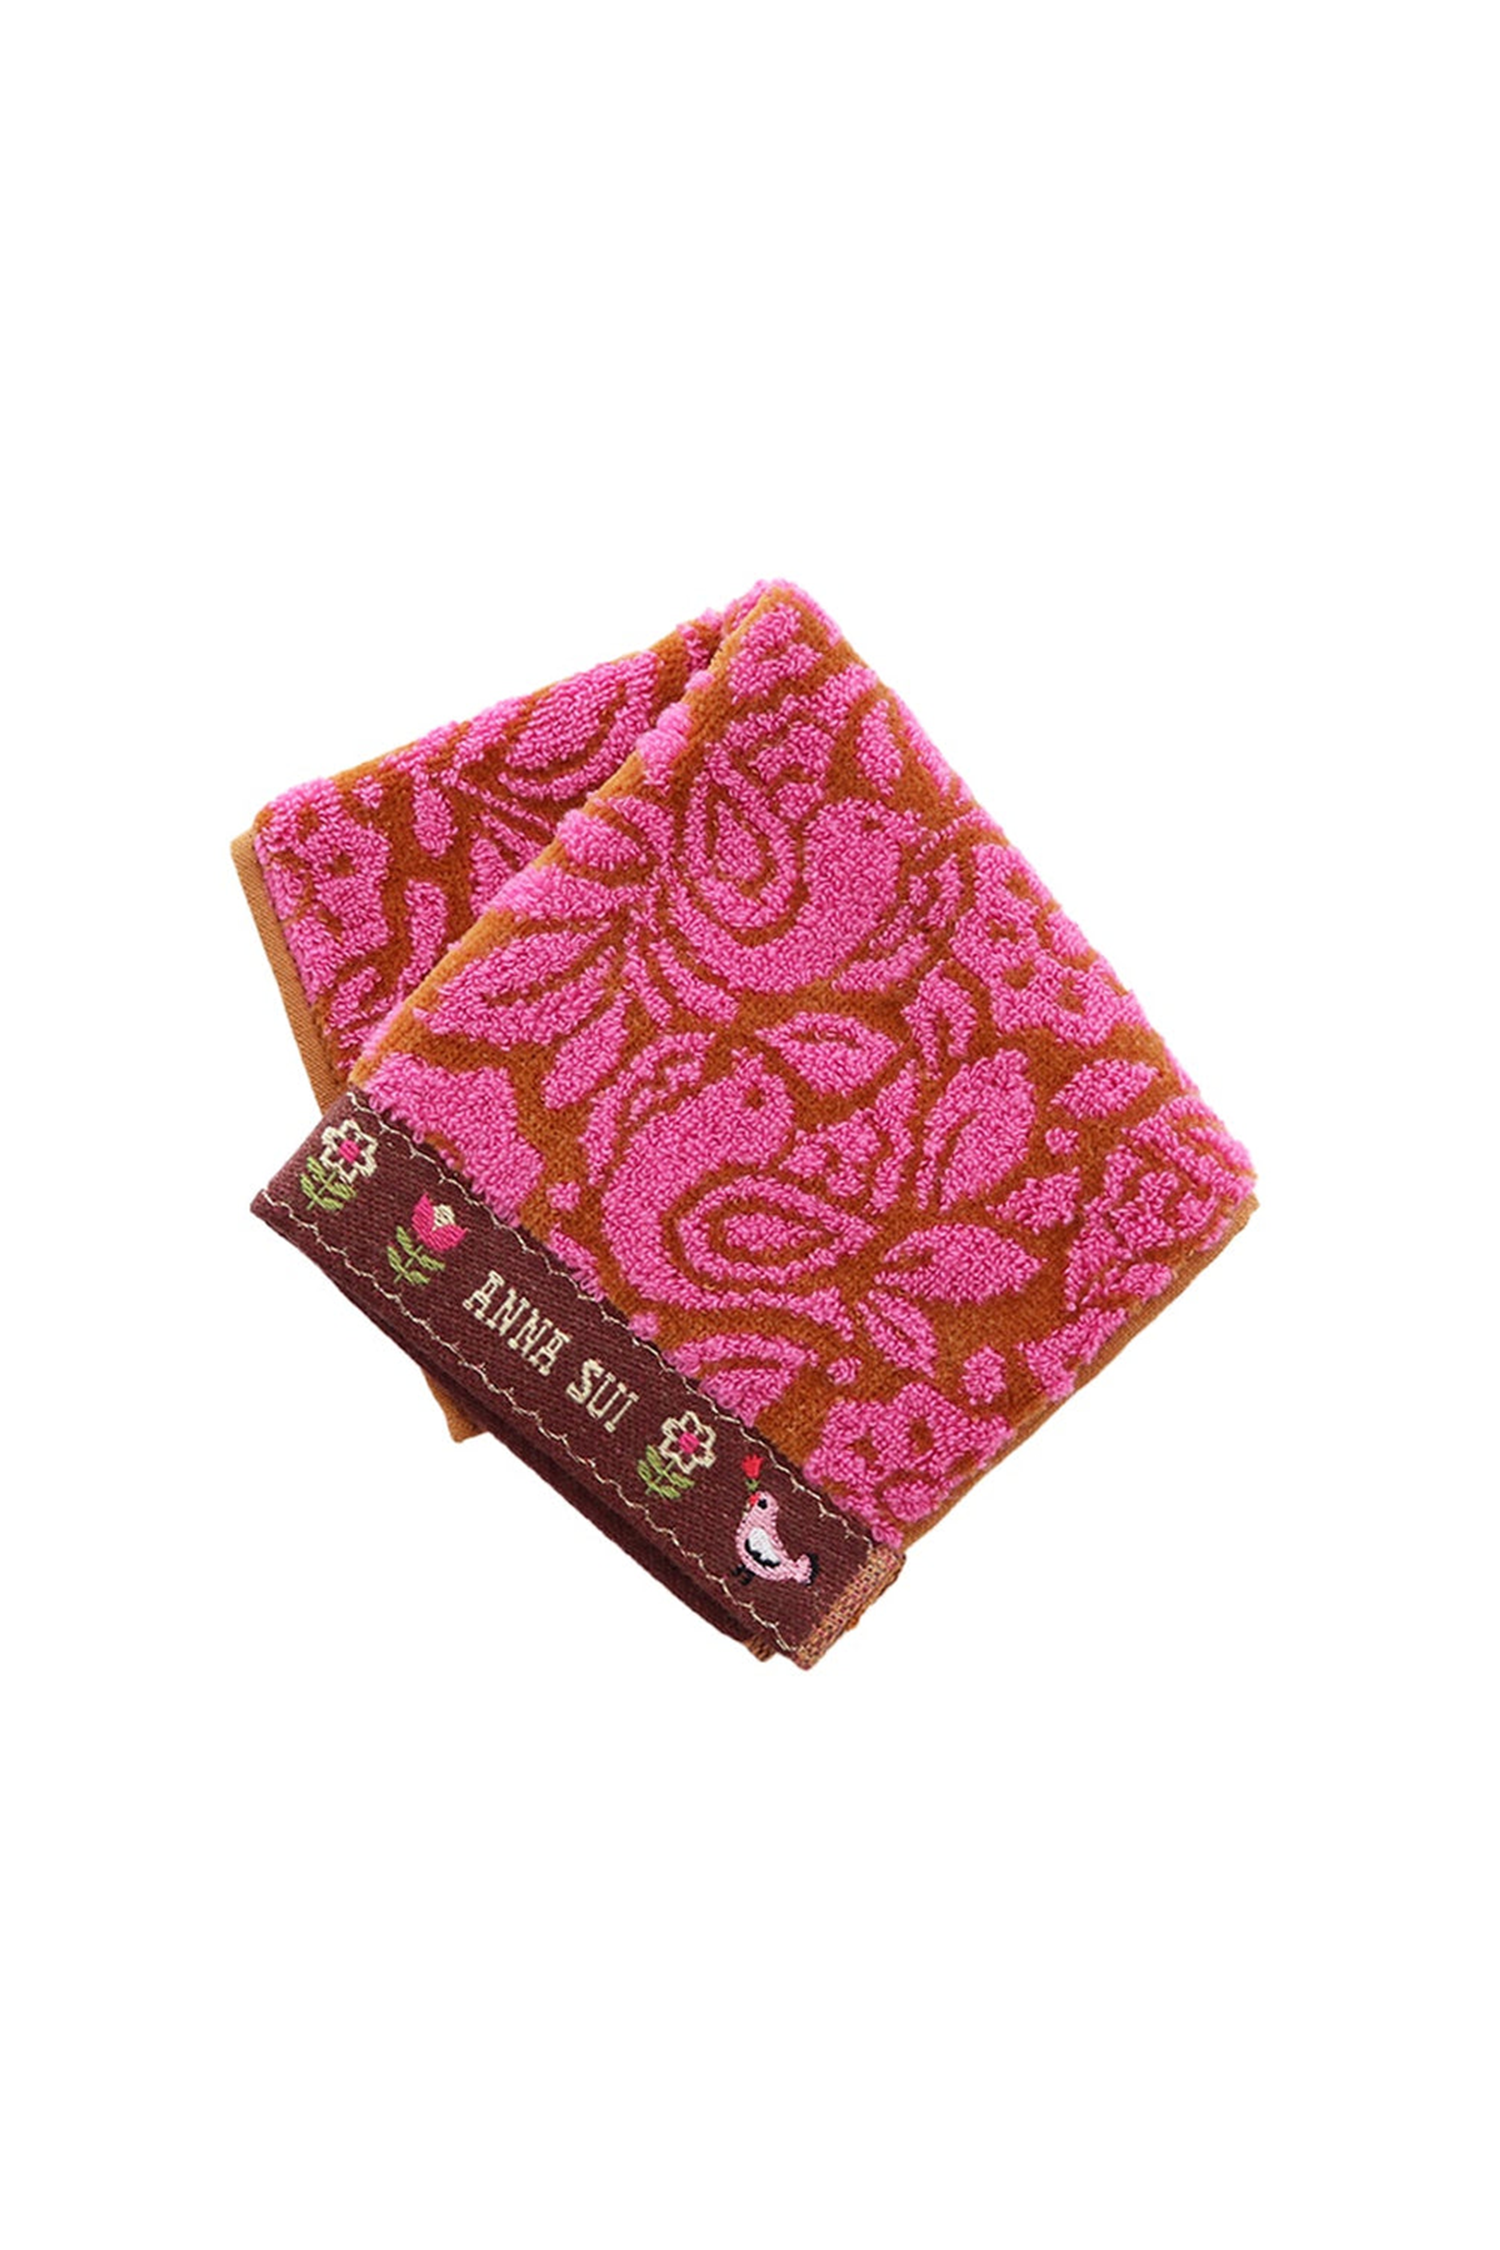 Birds of Paradise Washcloth, brown border bottom with Anna Sui label, a pink bird, line of flowers